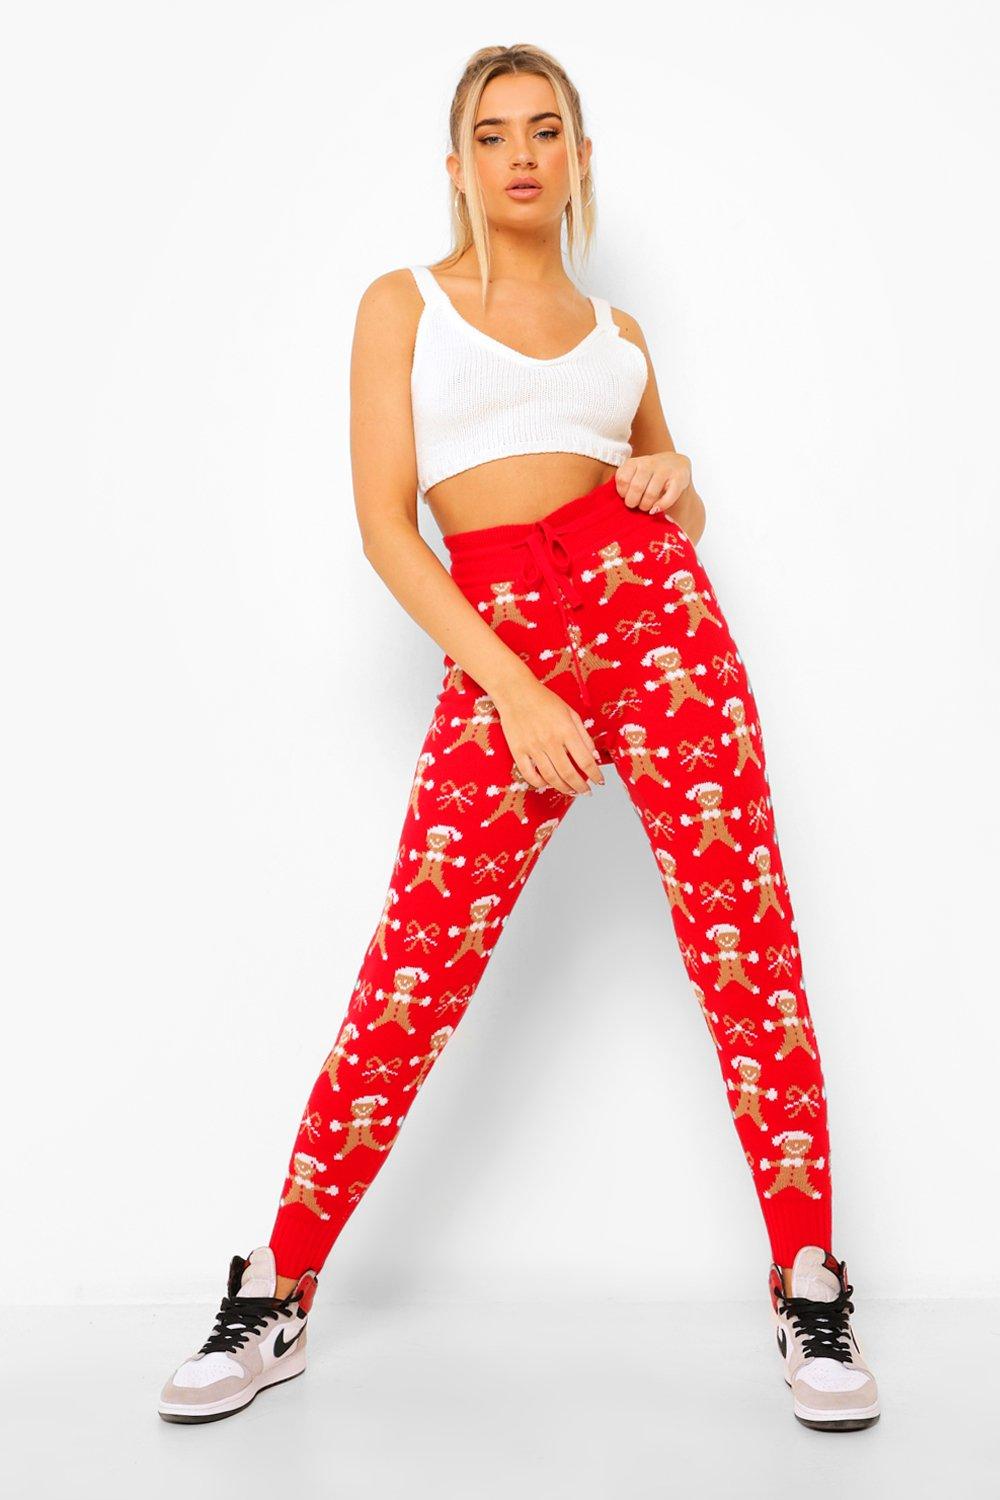 Womens Gingerbread Knit Christmas Leggings - Red - S, Red